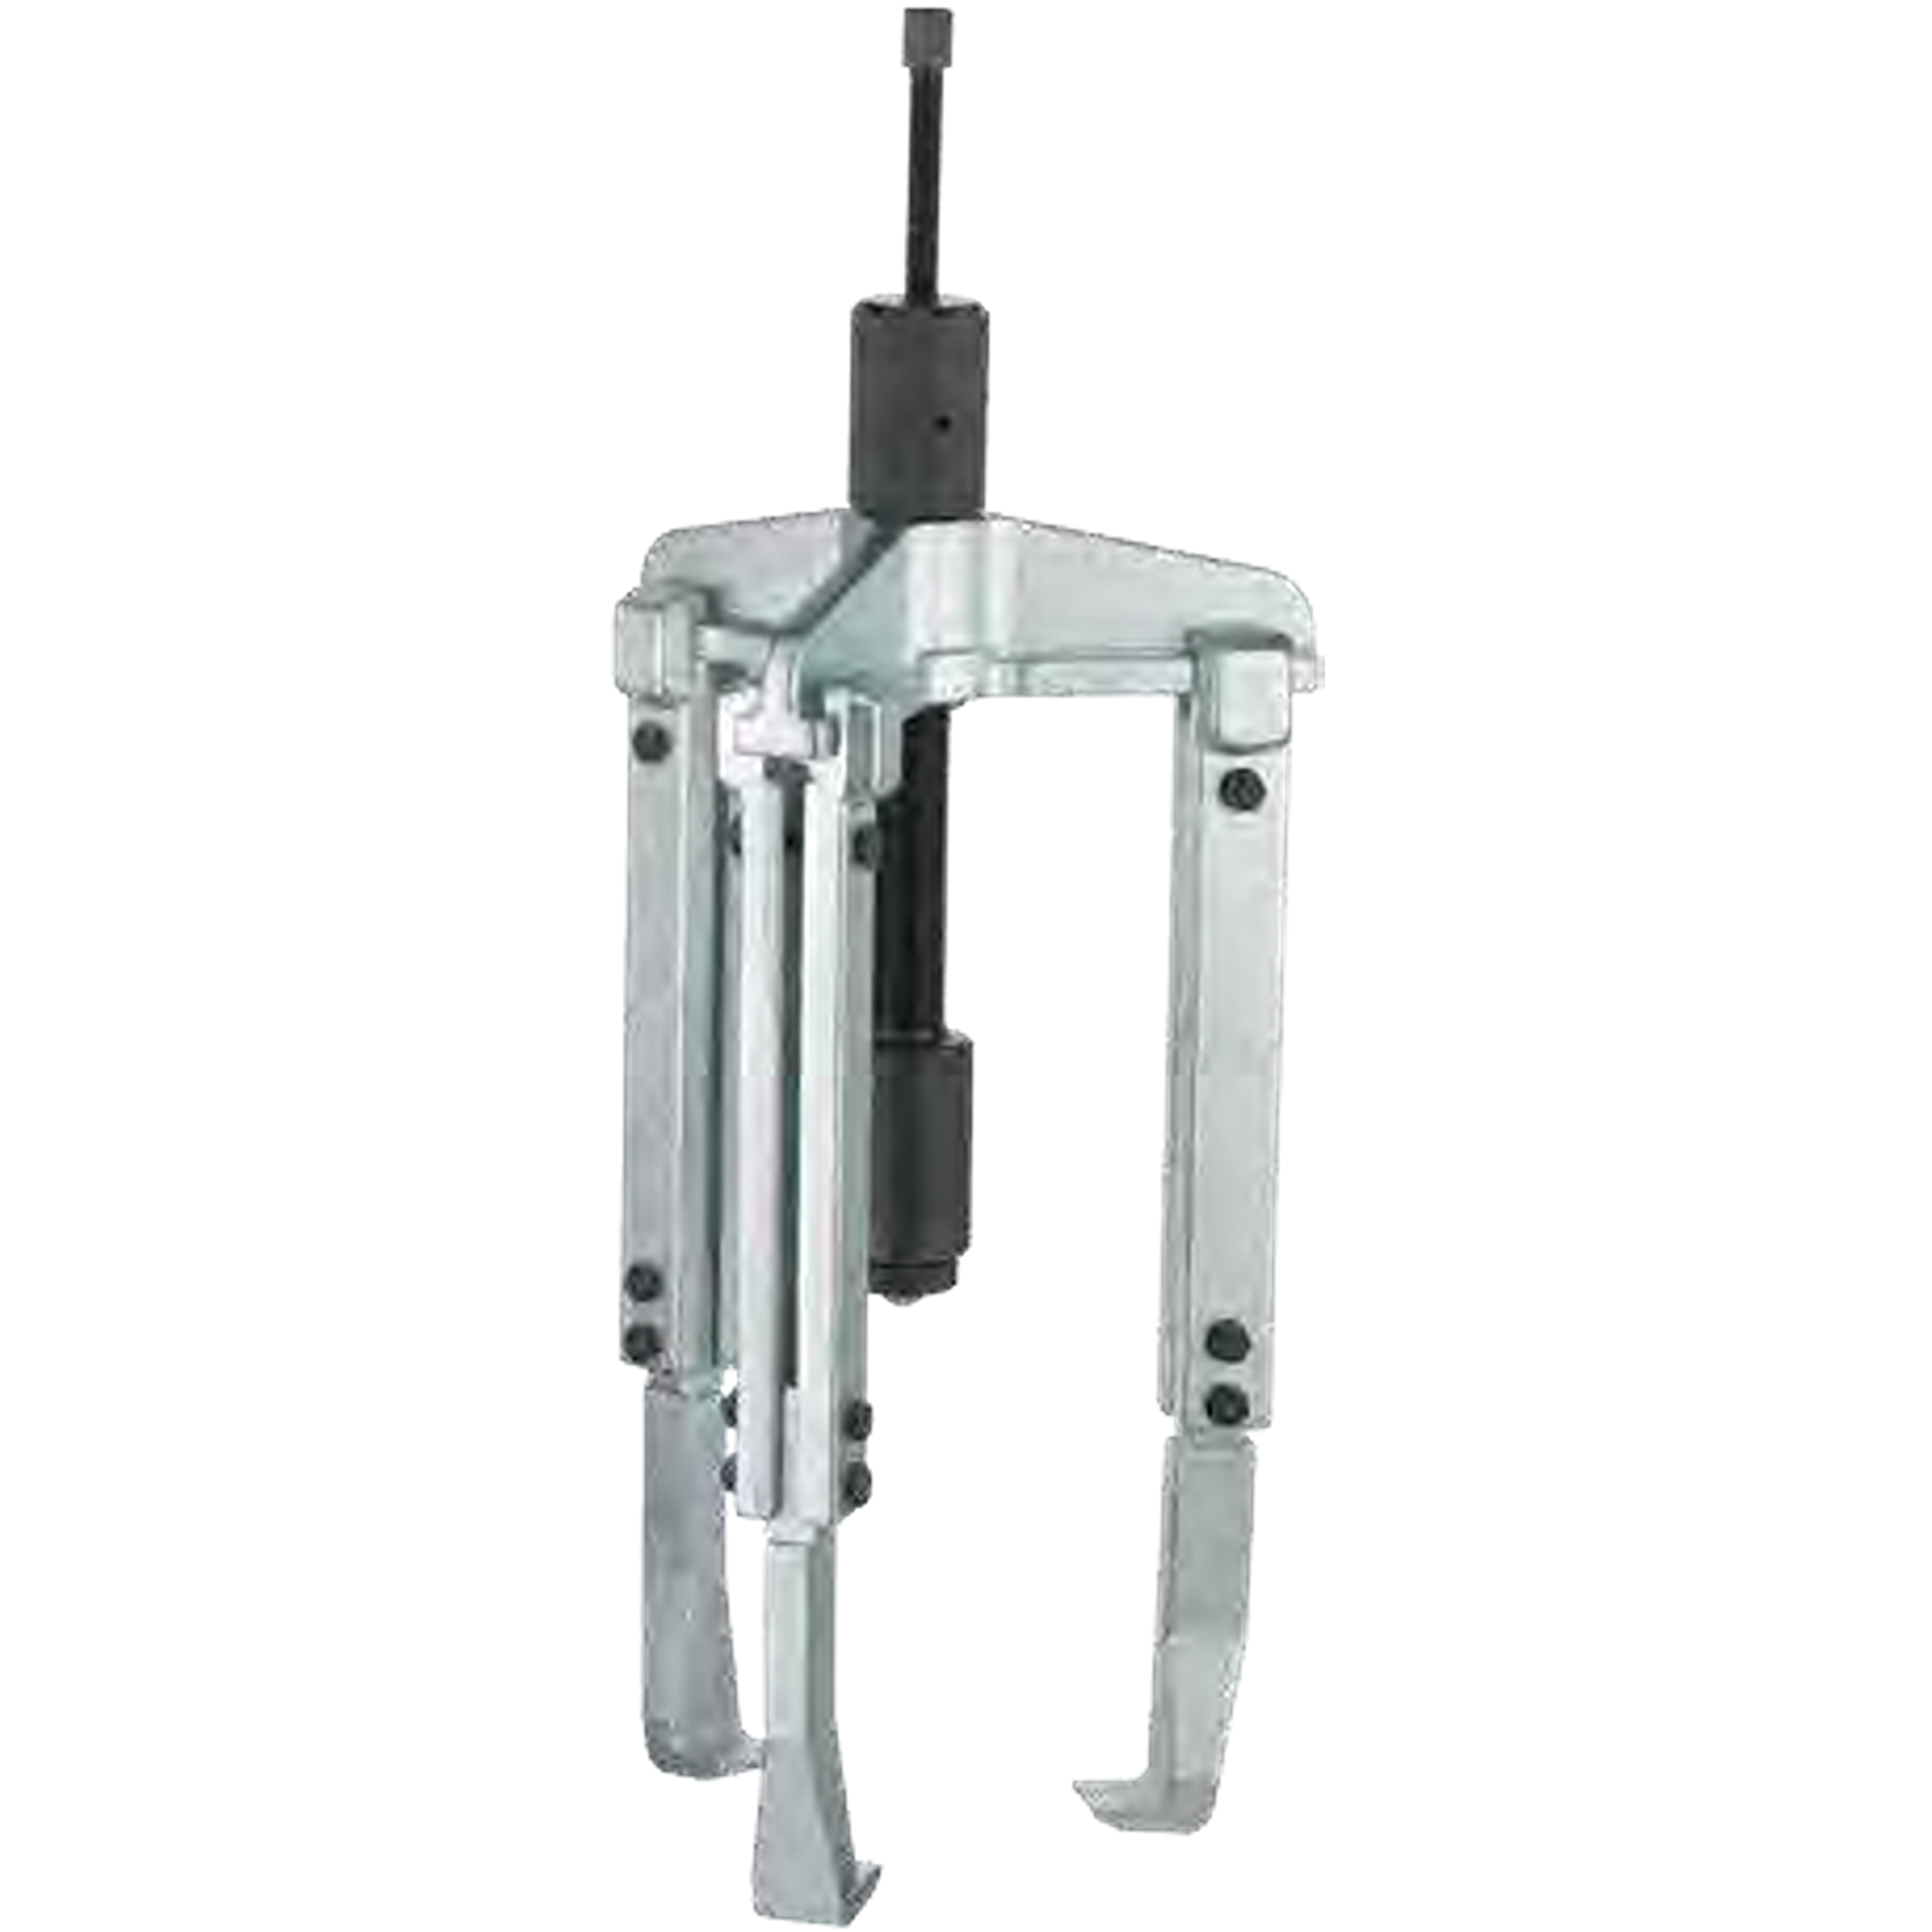 NEXUS F113-2 3-Arm Universal Puller With Extended Legs - Premium 3-Arm Universal Puller from NEXUS - Shop now at Yew Aik.